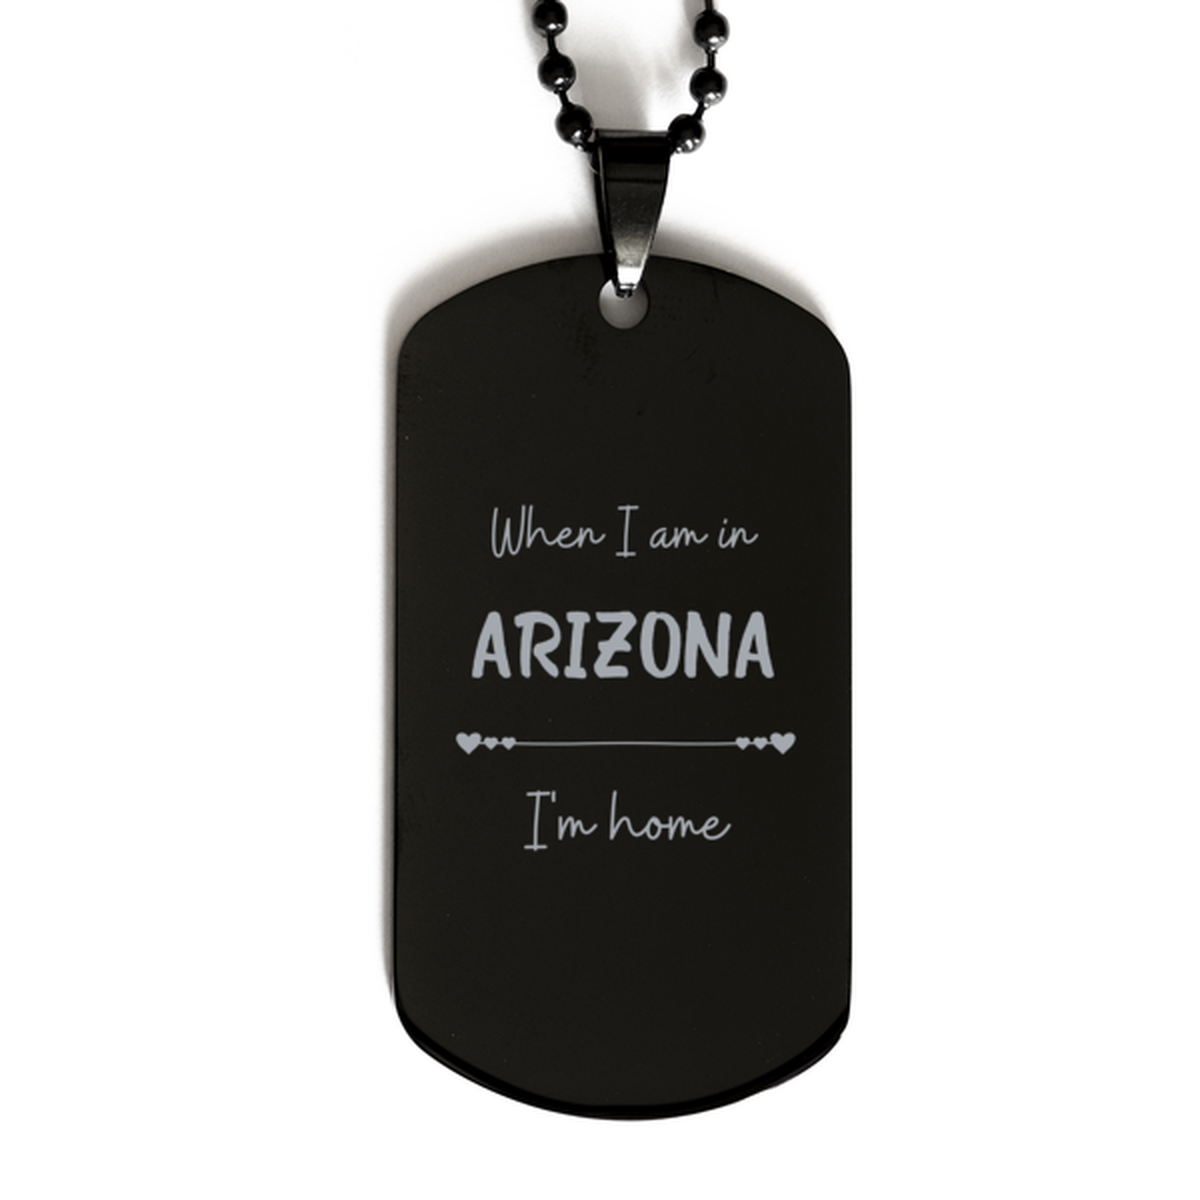 When I am in Arizona I'm home Black Dog Tag, Cheap Gifts For Arizona, State Arizona Birthday Gifts for Friends Coworker